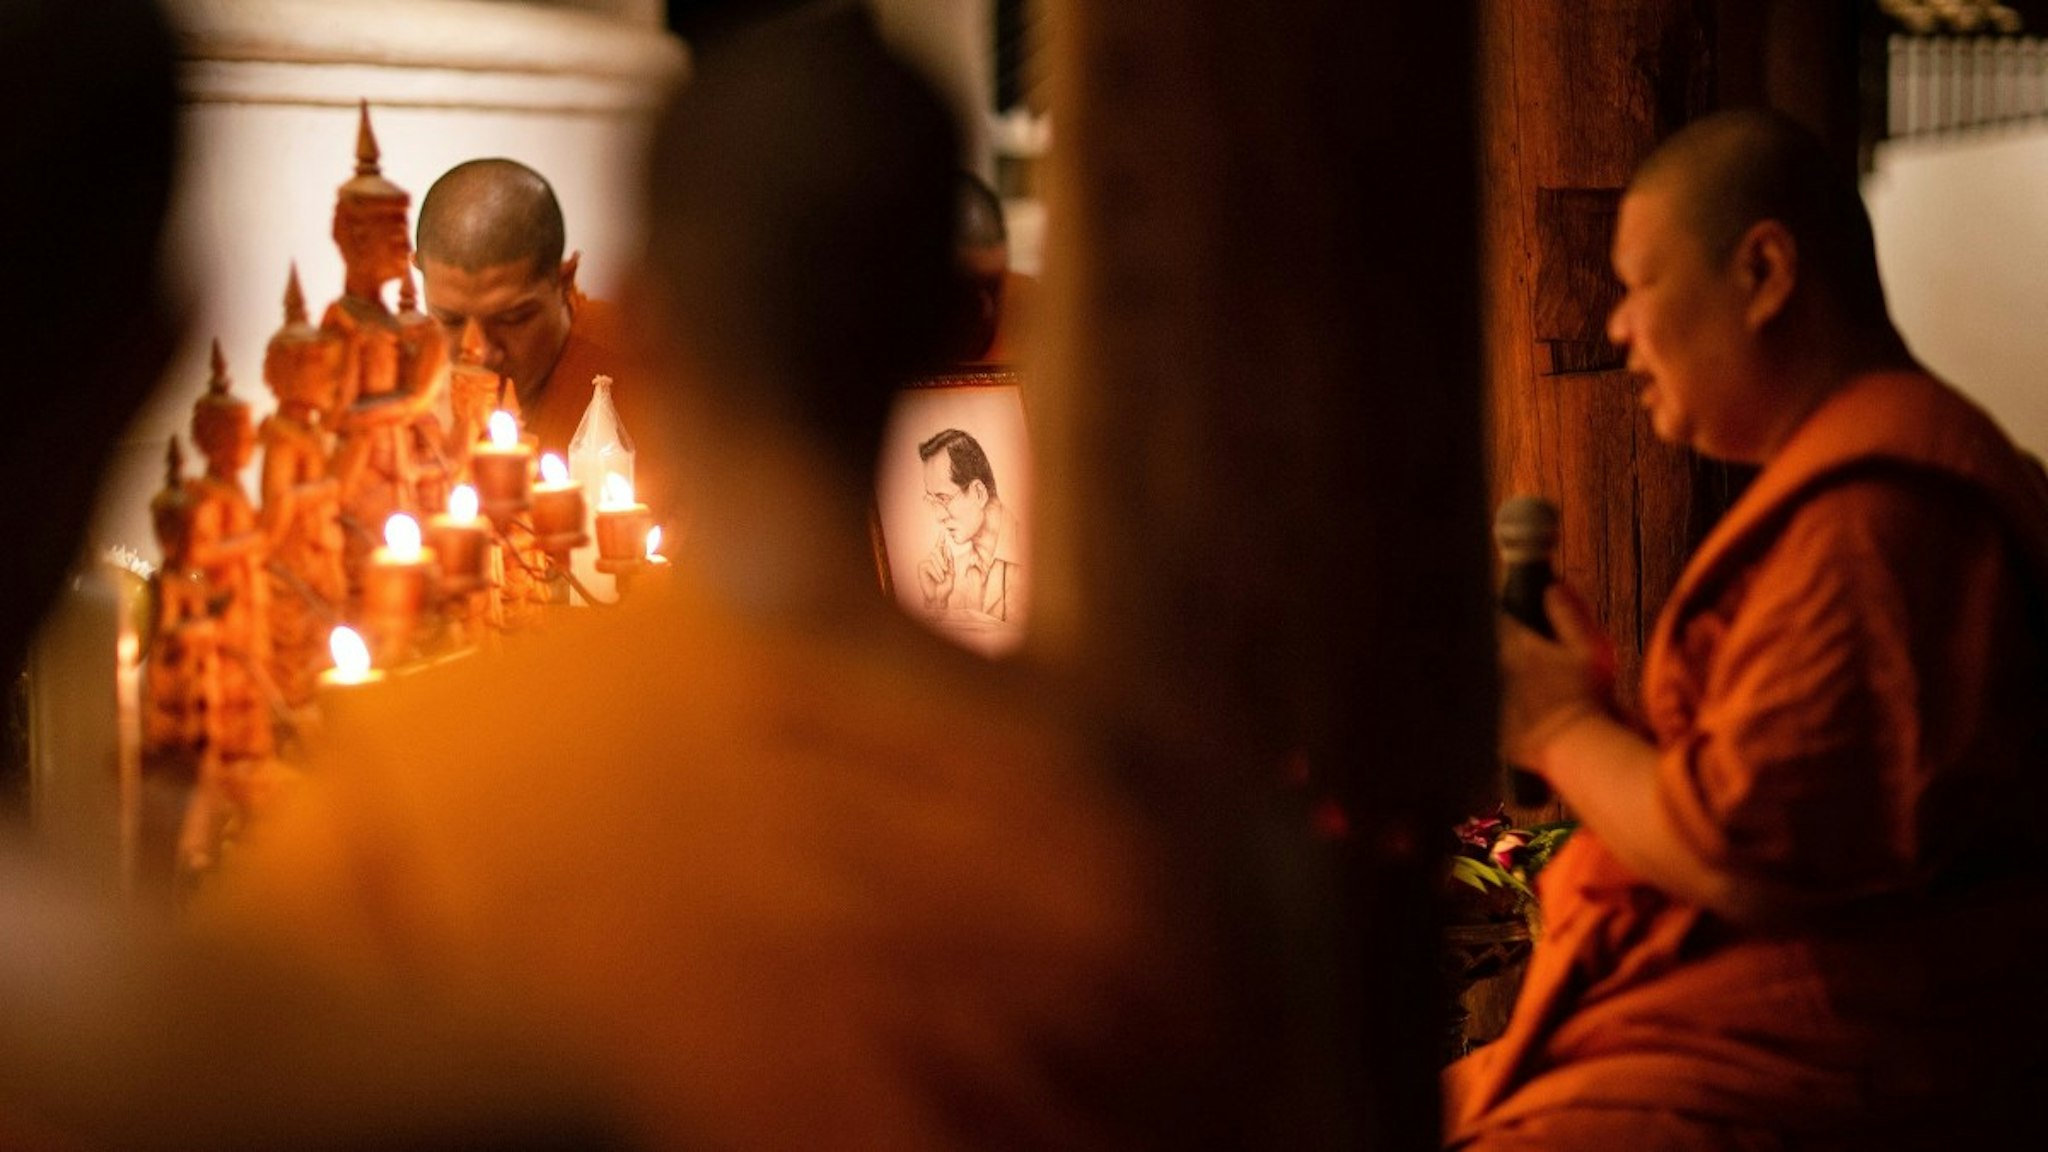 Thai Buddhist monks pray during a religious ceremony to commemorate The 6th death anniversary of Thai King Bhumibol Adulyadej at Wat Pha Lat Temple.